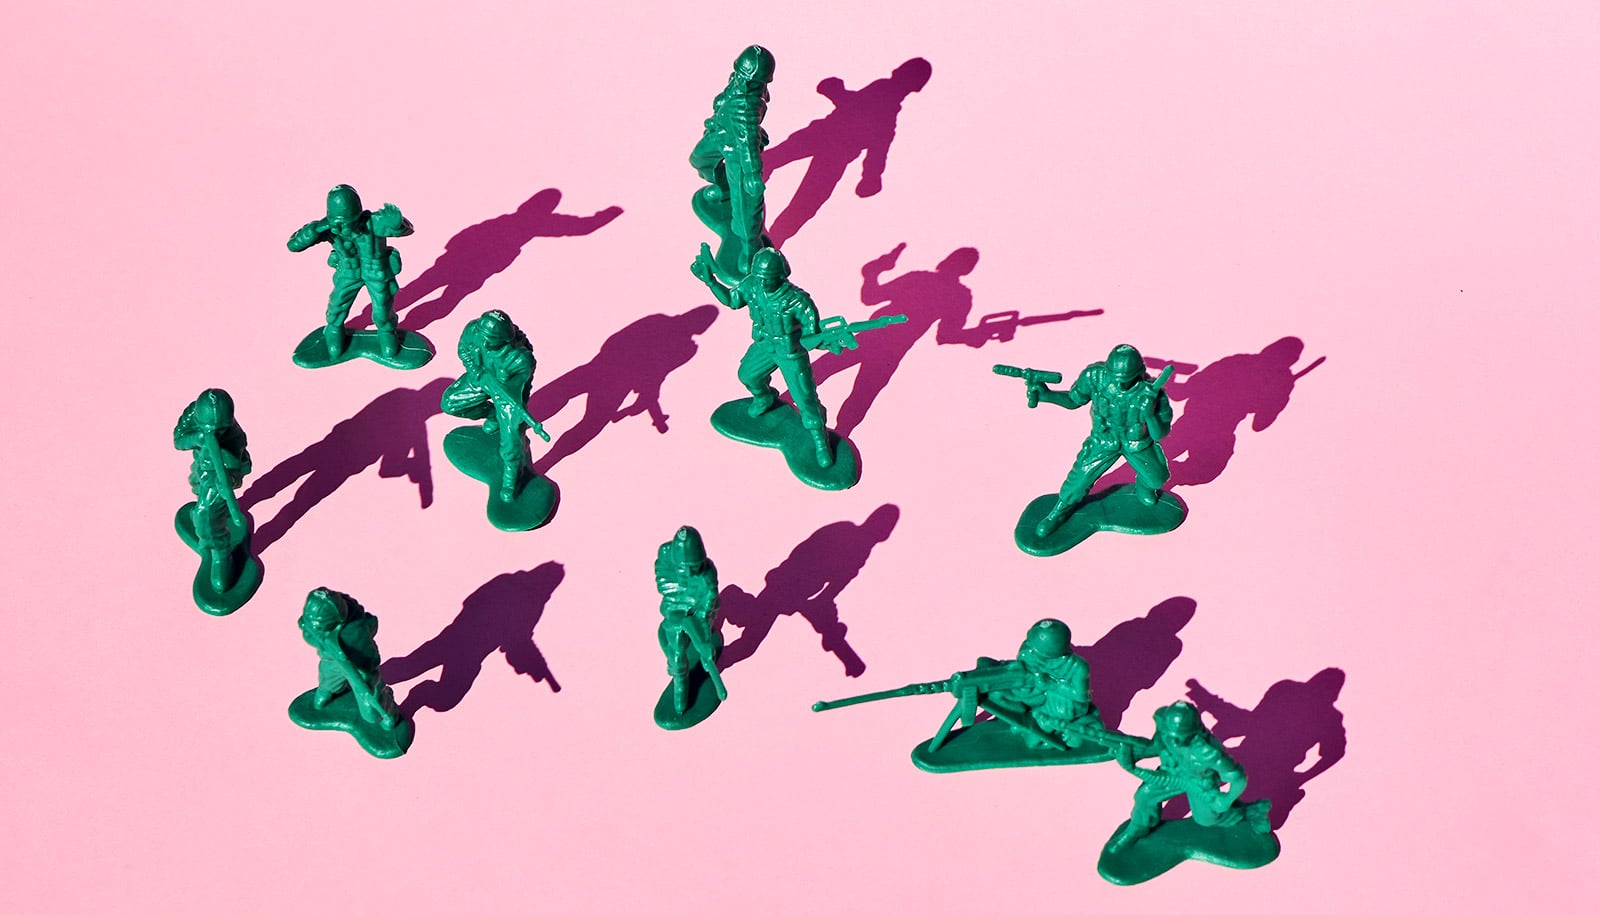 Green army men toys on a pink background.